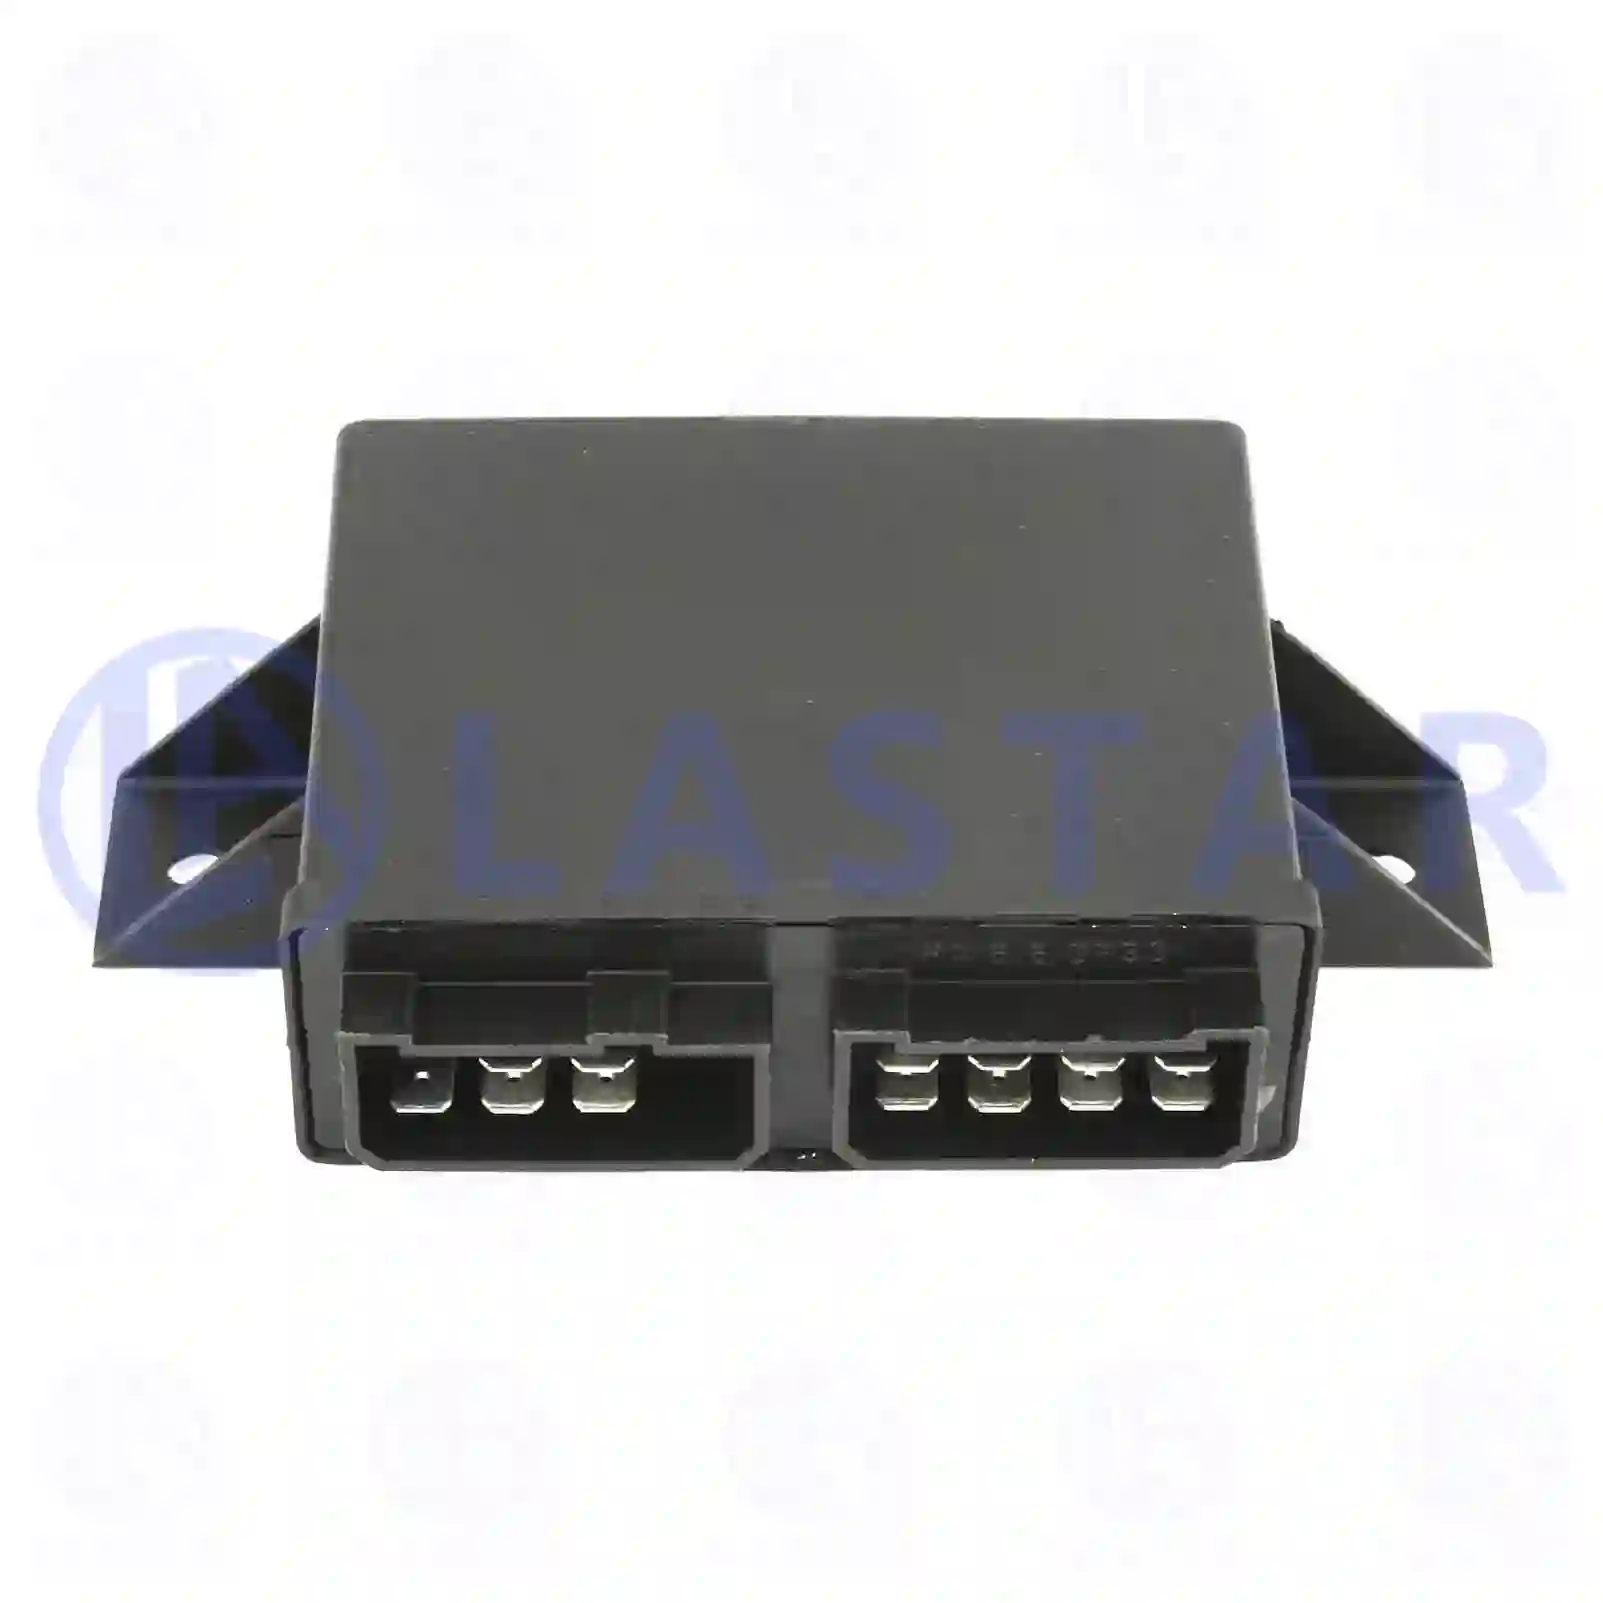 Turn signal relay, 77710644, 1334196, 289929, 334470, 365559, ZG21258-0008 ||  77710644 Lastar Spare Part | Truck Spare Parts, Auotomotive Spare Parts Turn signal relay, 77710644, 1334196, 289929, 334470, 365559, ZG21258-0008 ||  77710644 Lastar Spare Part | Truck Spare Parts, Auotomotive Spare Parts